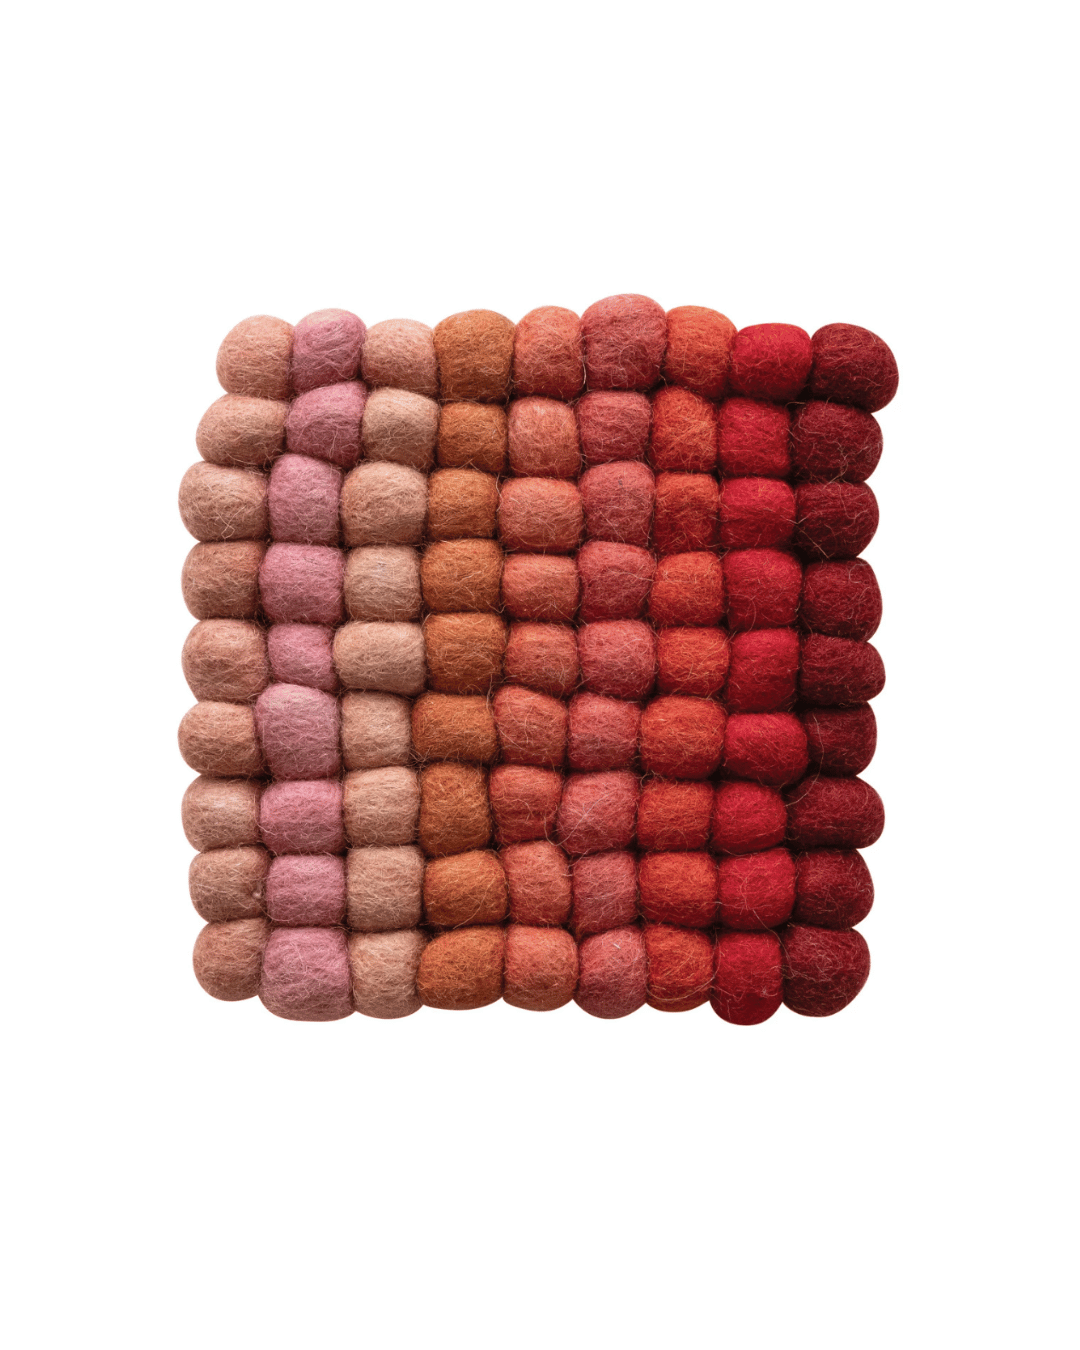 A grid of Creative Co-op Handmade Wool Felt Ball Trivets in varying shades of red, pink, and orange, arranged seamlessly to form a textured square pattern, isolated on a white background in Scottsdale Arizona.